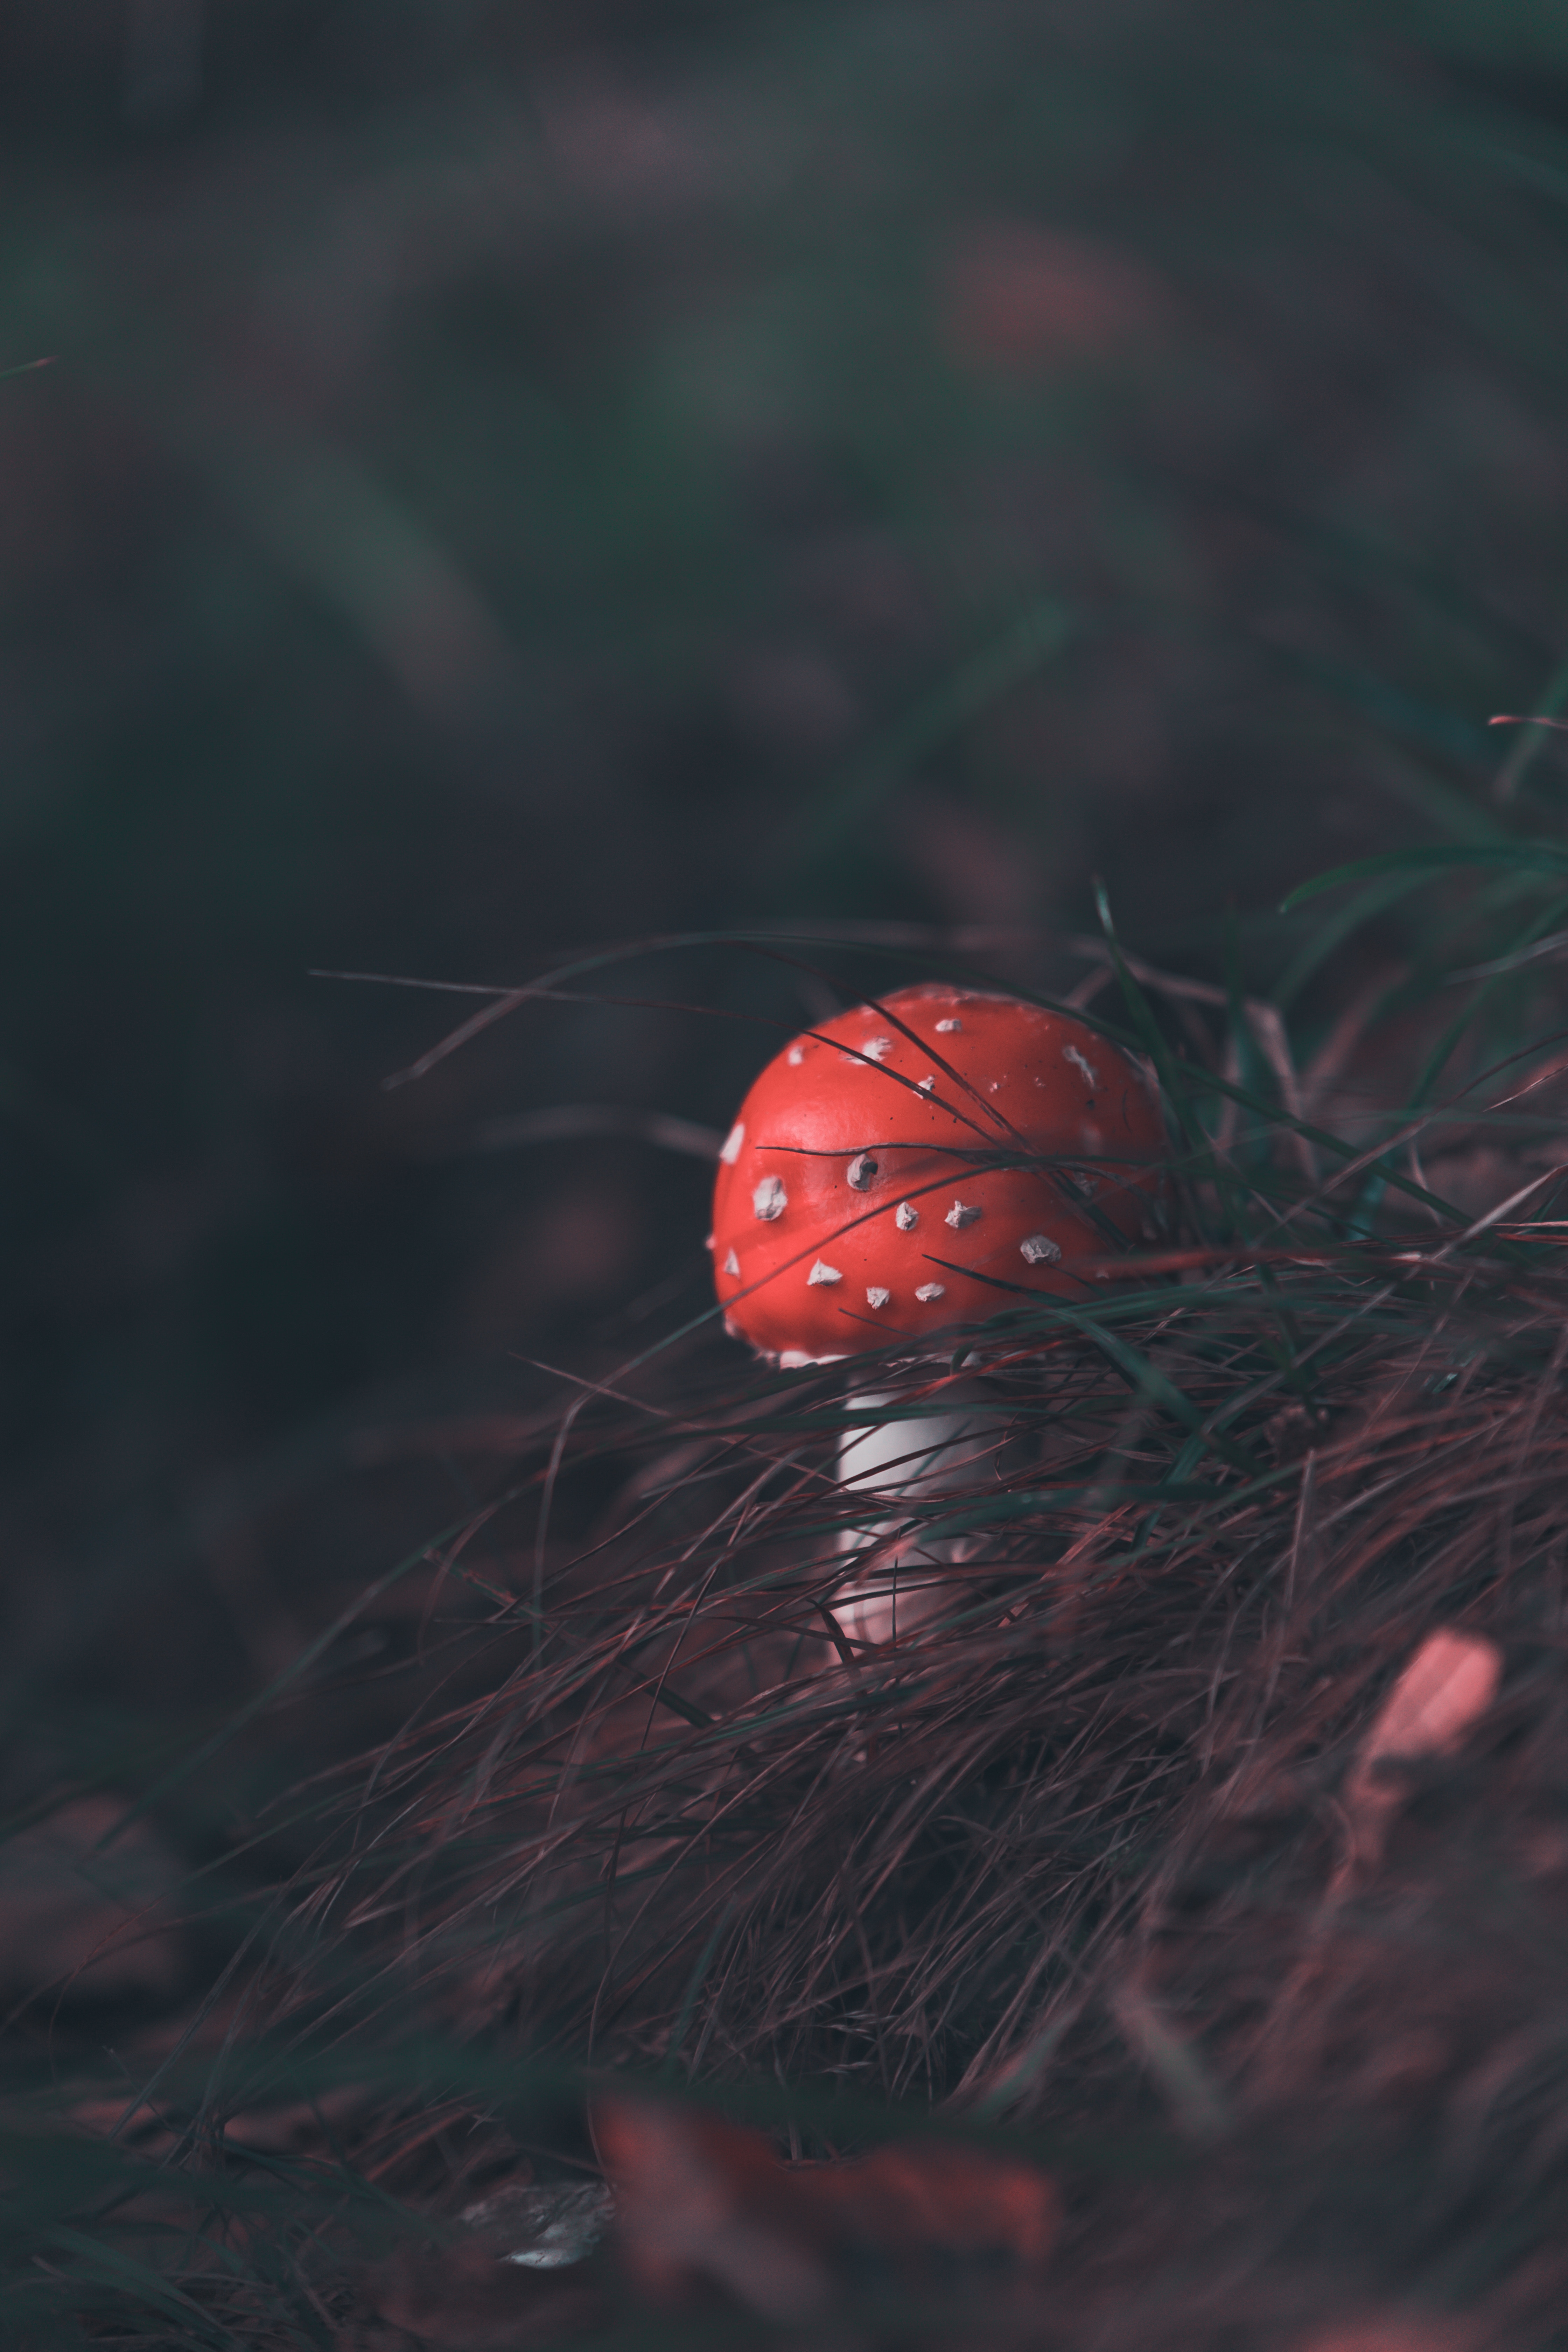 mushroom, smooth, nature, grass, blur, fly agaric lock screen backgrounds